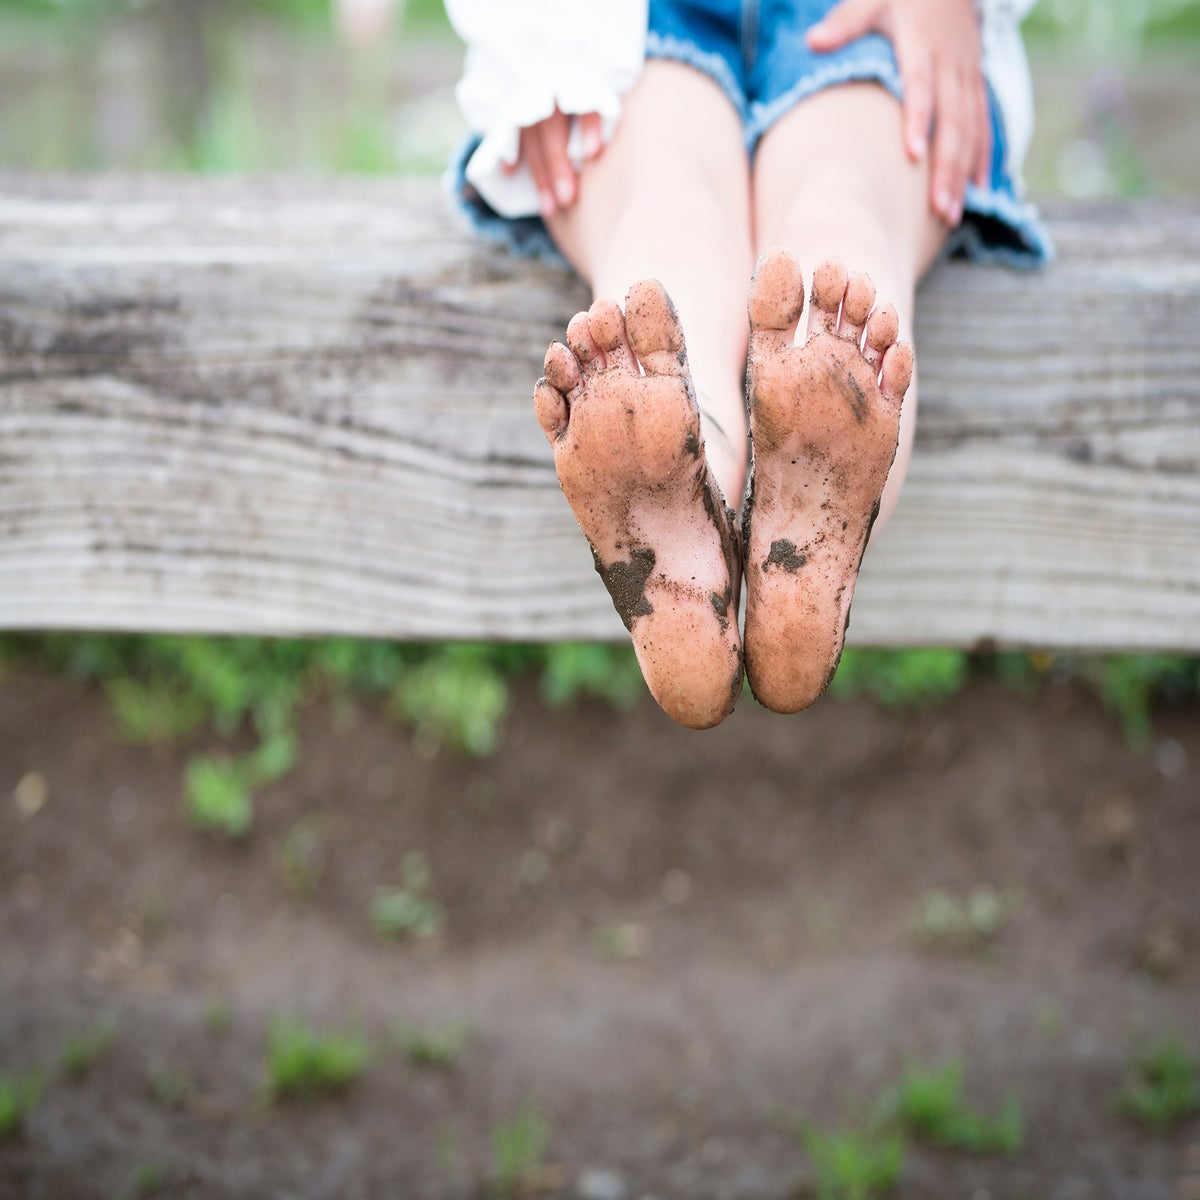 Comment: Why kids should go barefoot more (and probably adults, too)